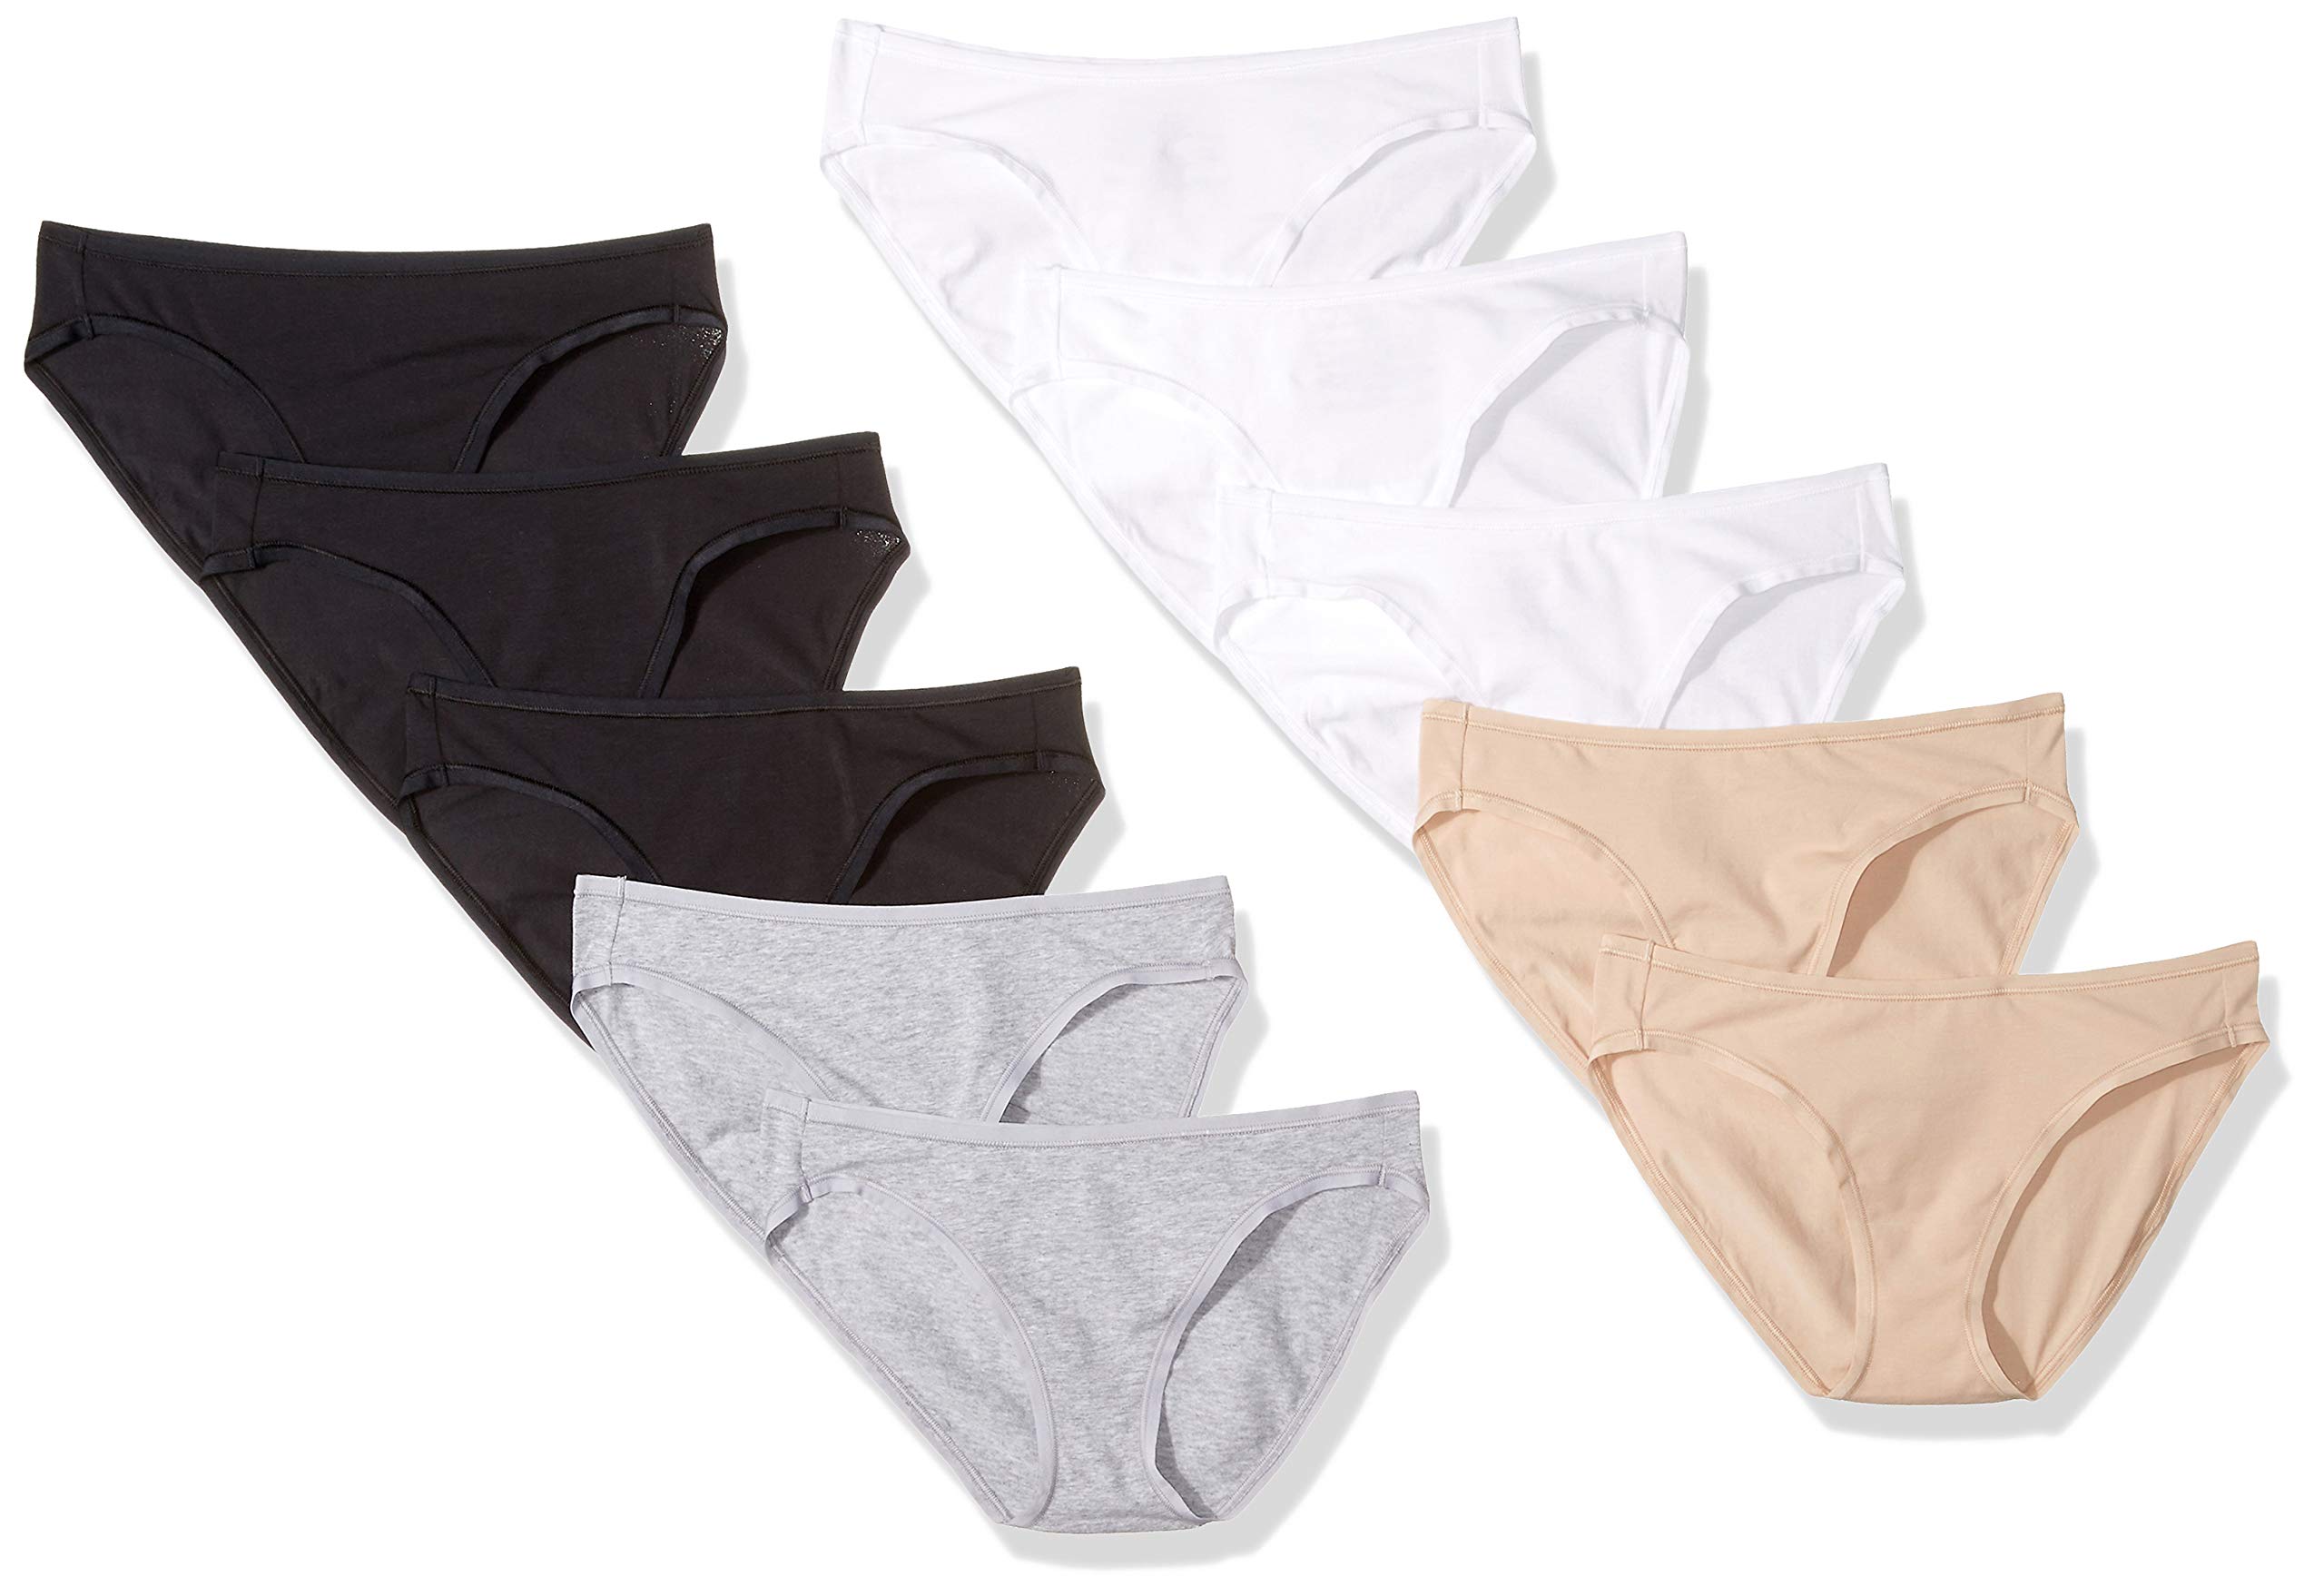 Wide-brimmed Rubber Band Mid Rise Women panties Solid Pure Cotton Underwear